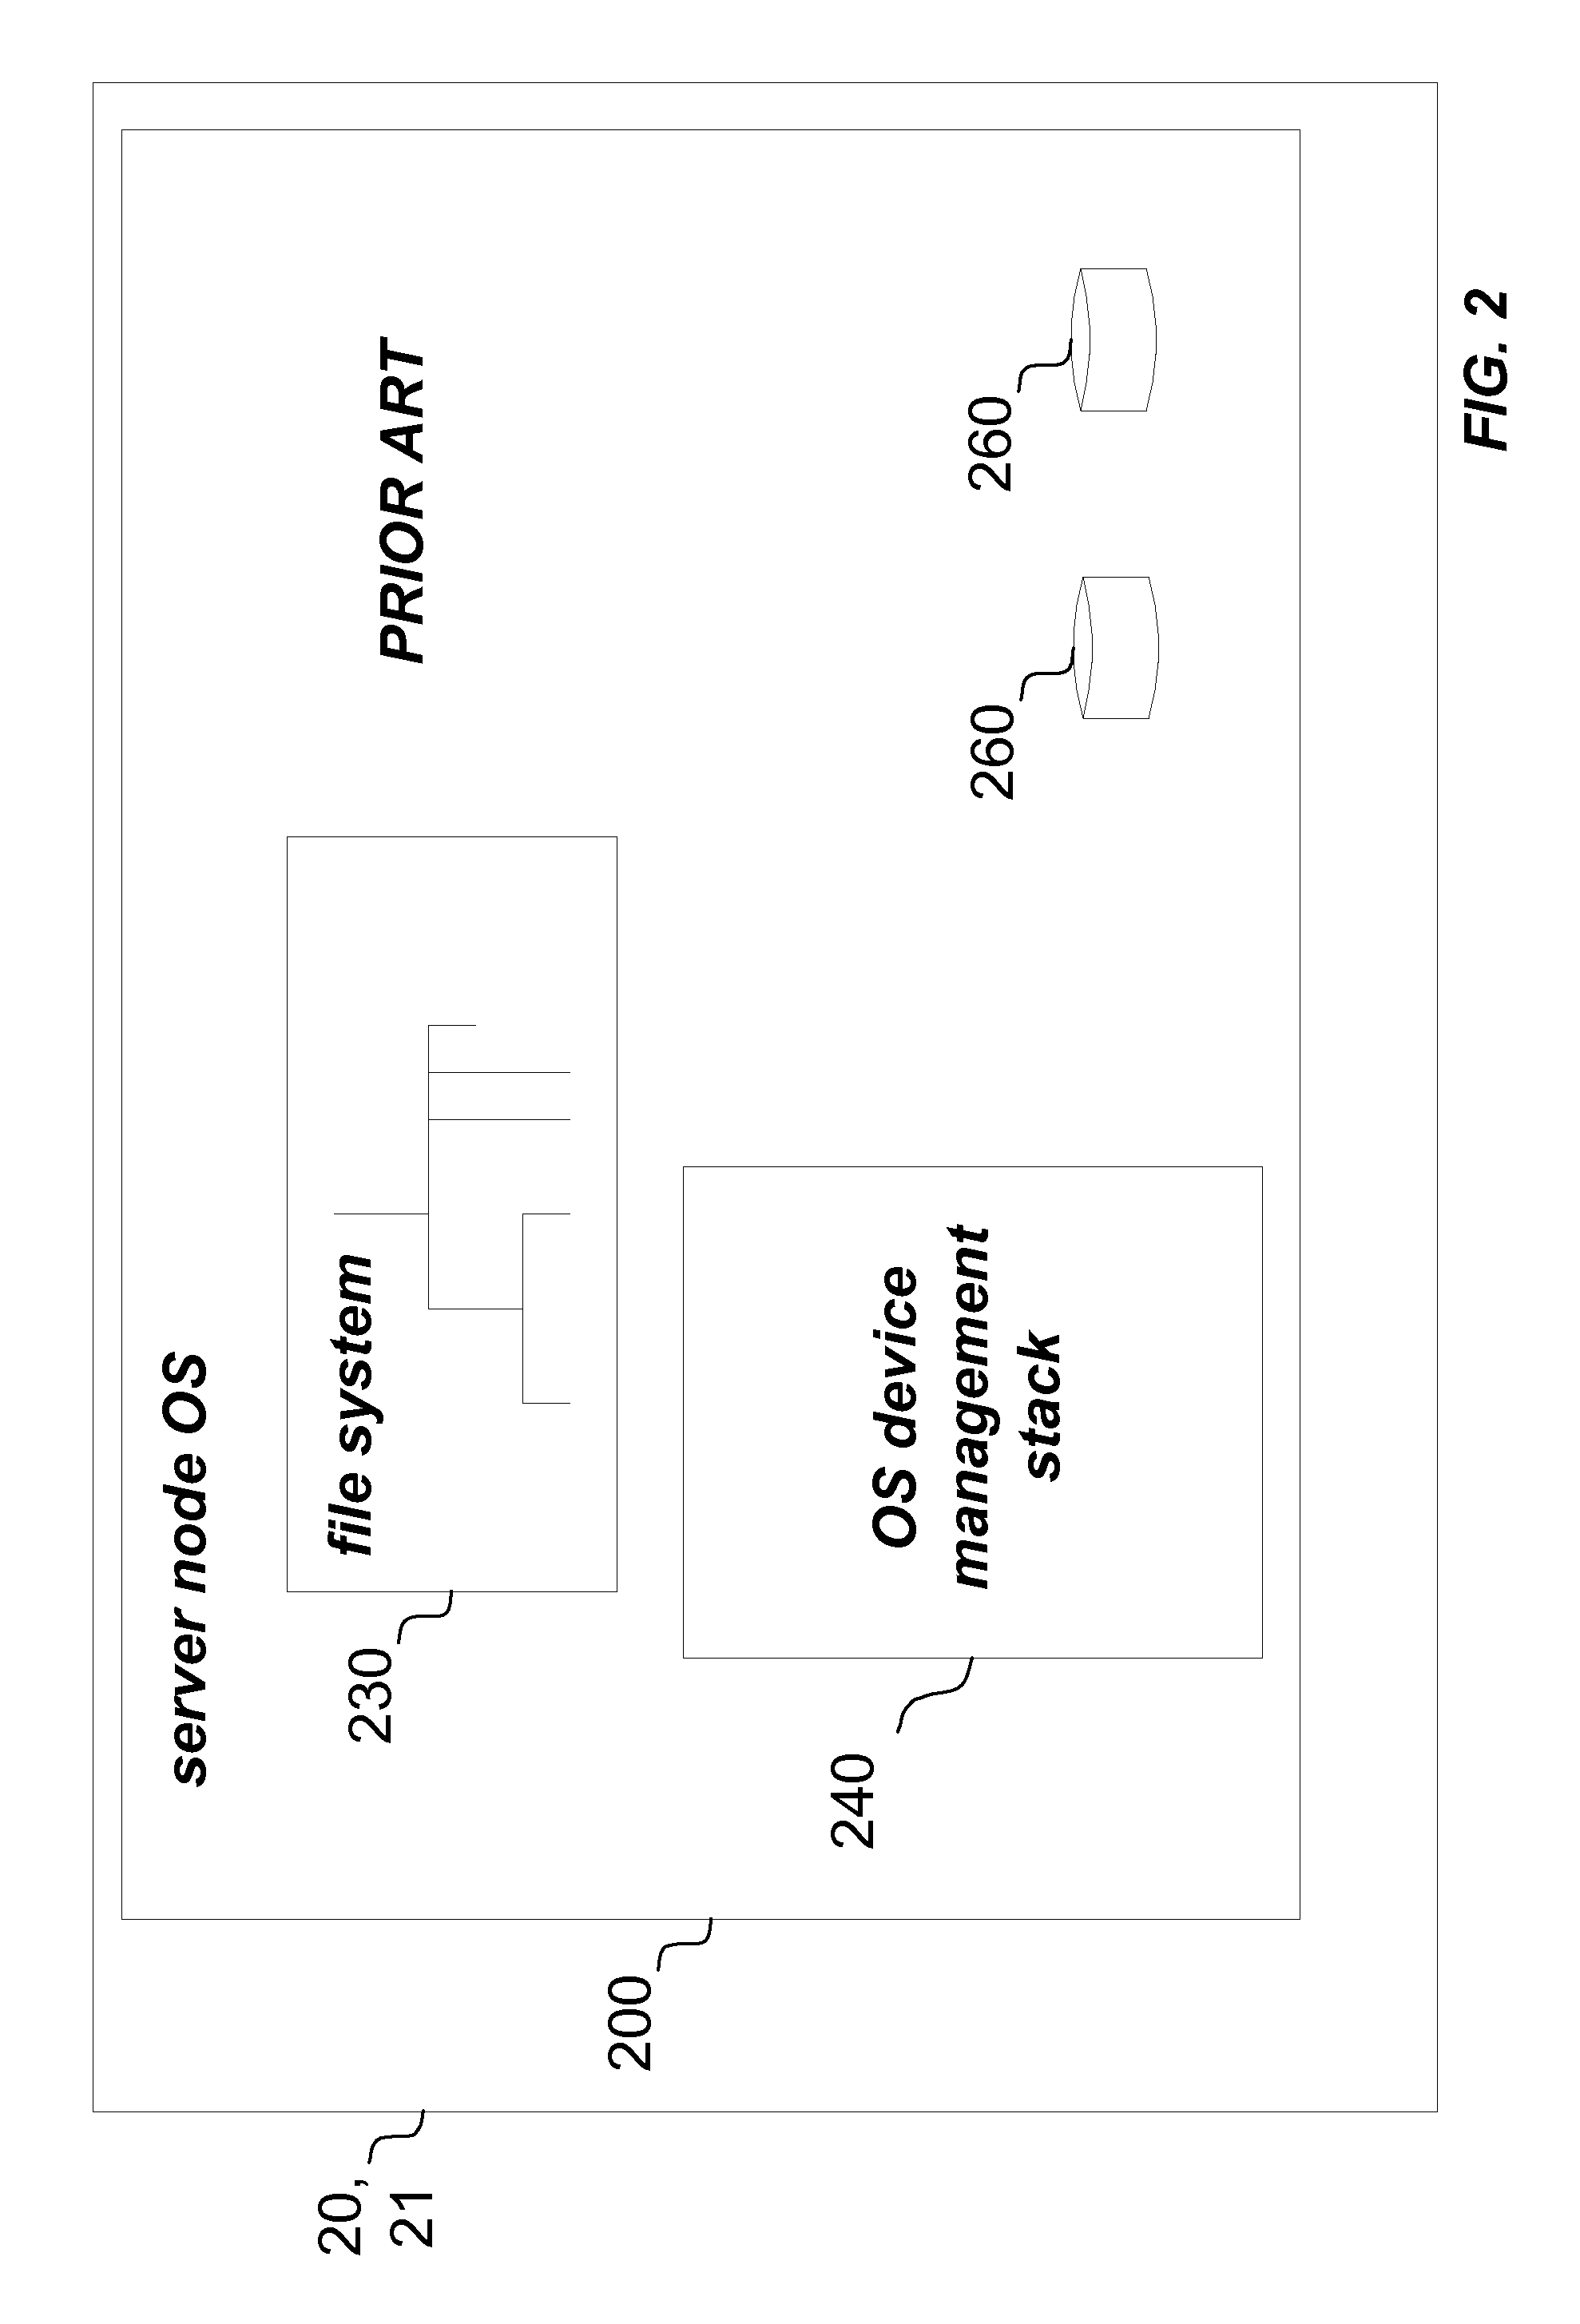 Apparatus and method for provisioning storage to a shared file system in a storage area network